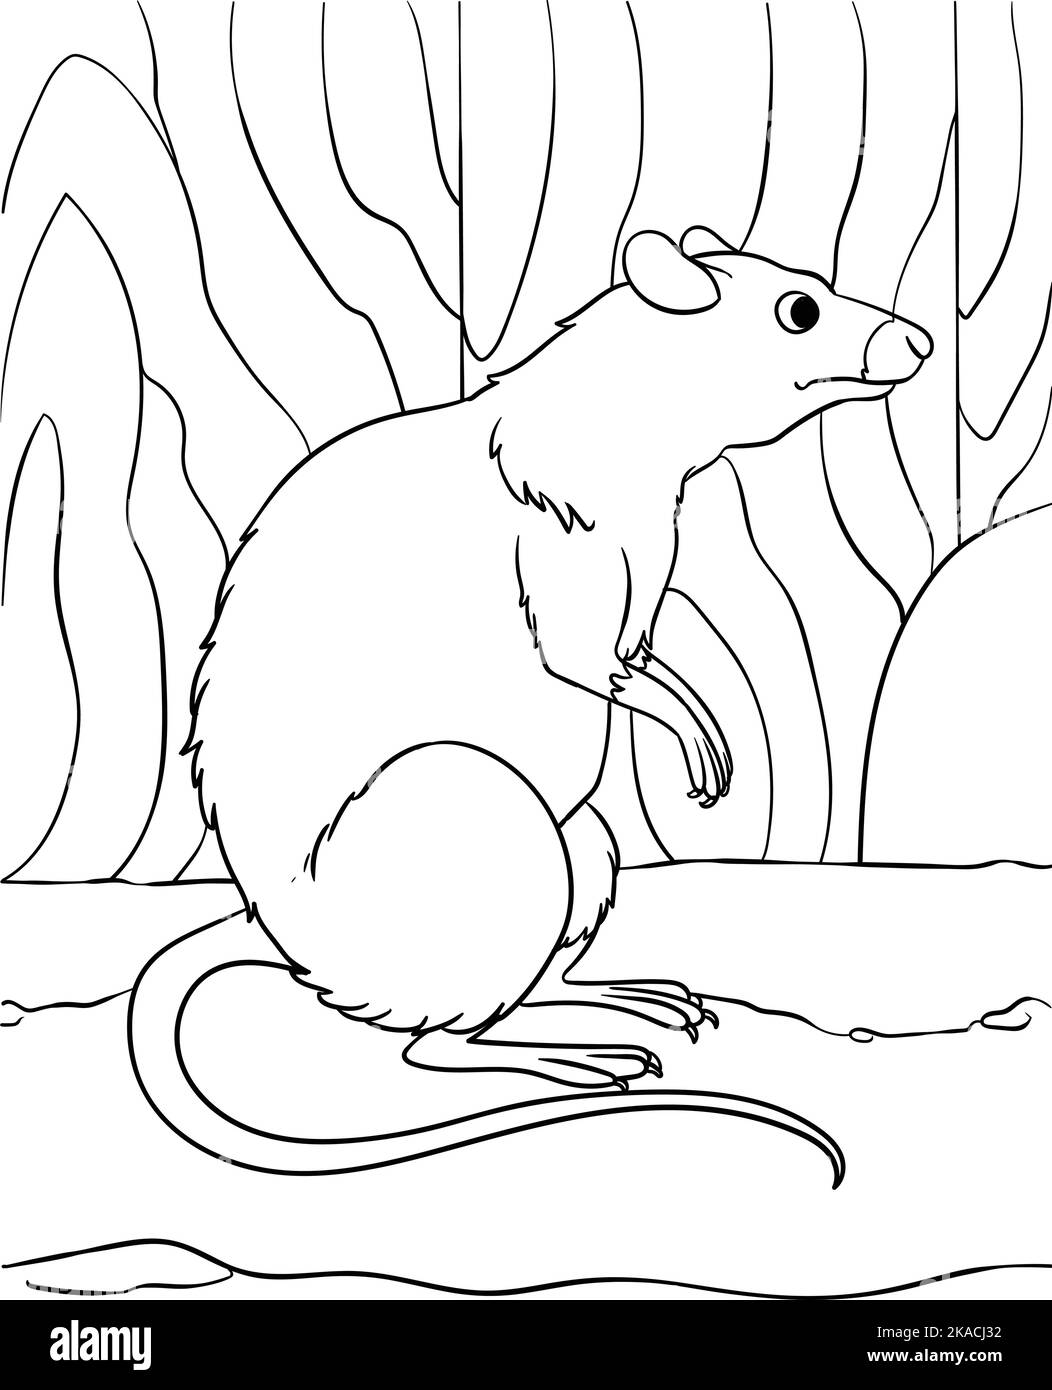 Mouse Coloring Page Isolated for Kids Stock Vector